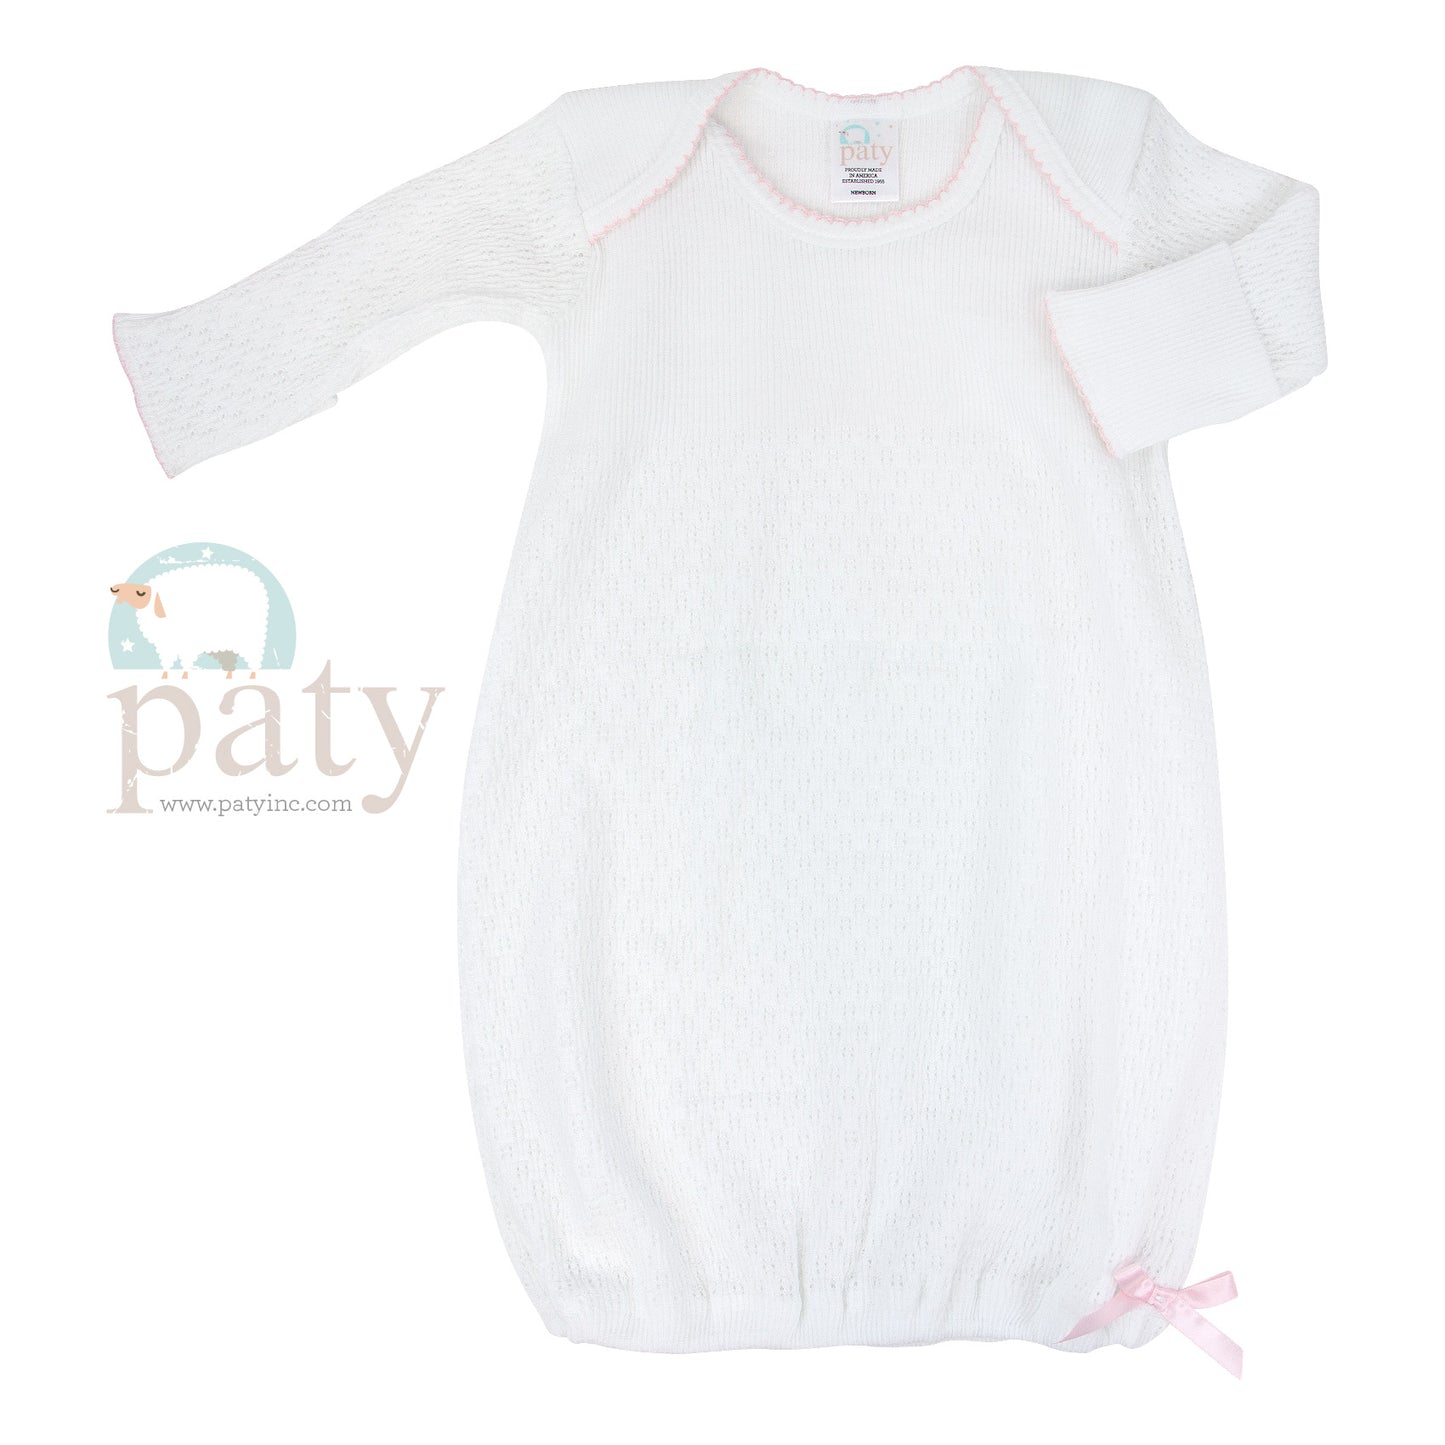 A white Paty baby gown with pink trim, featuring an easy-access design for maximum convenience.